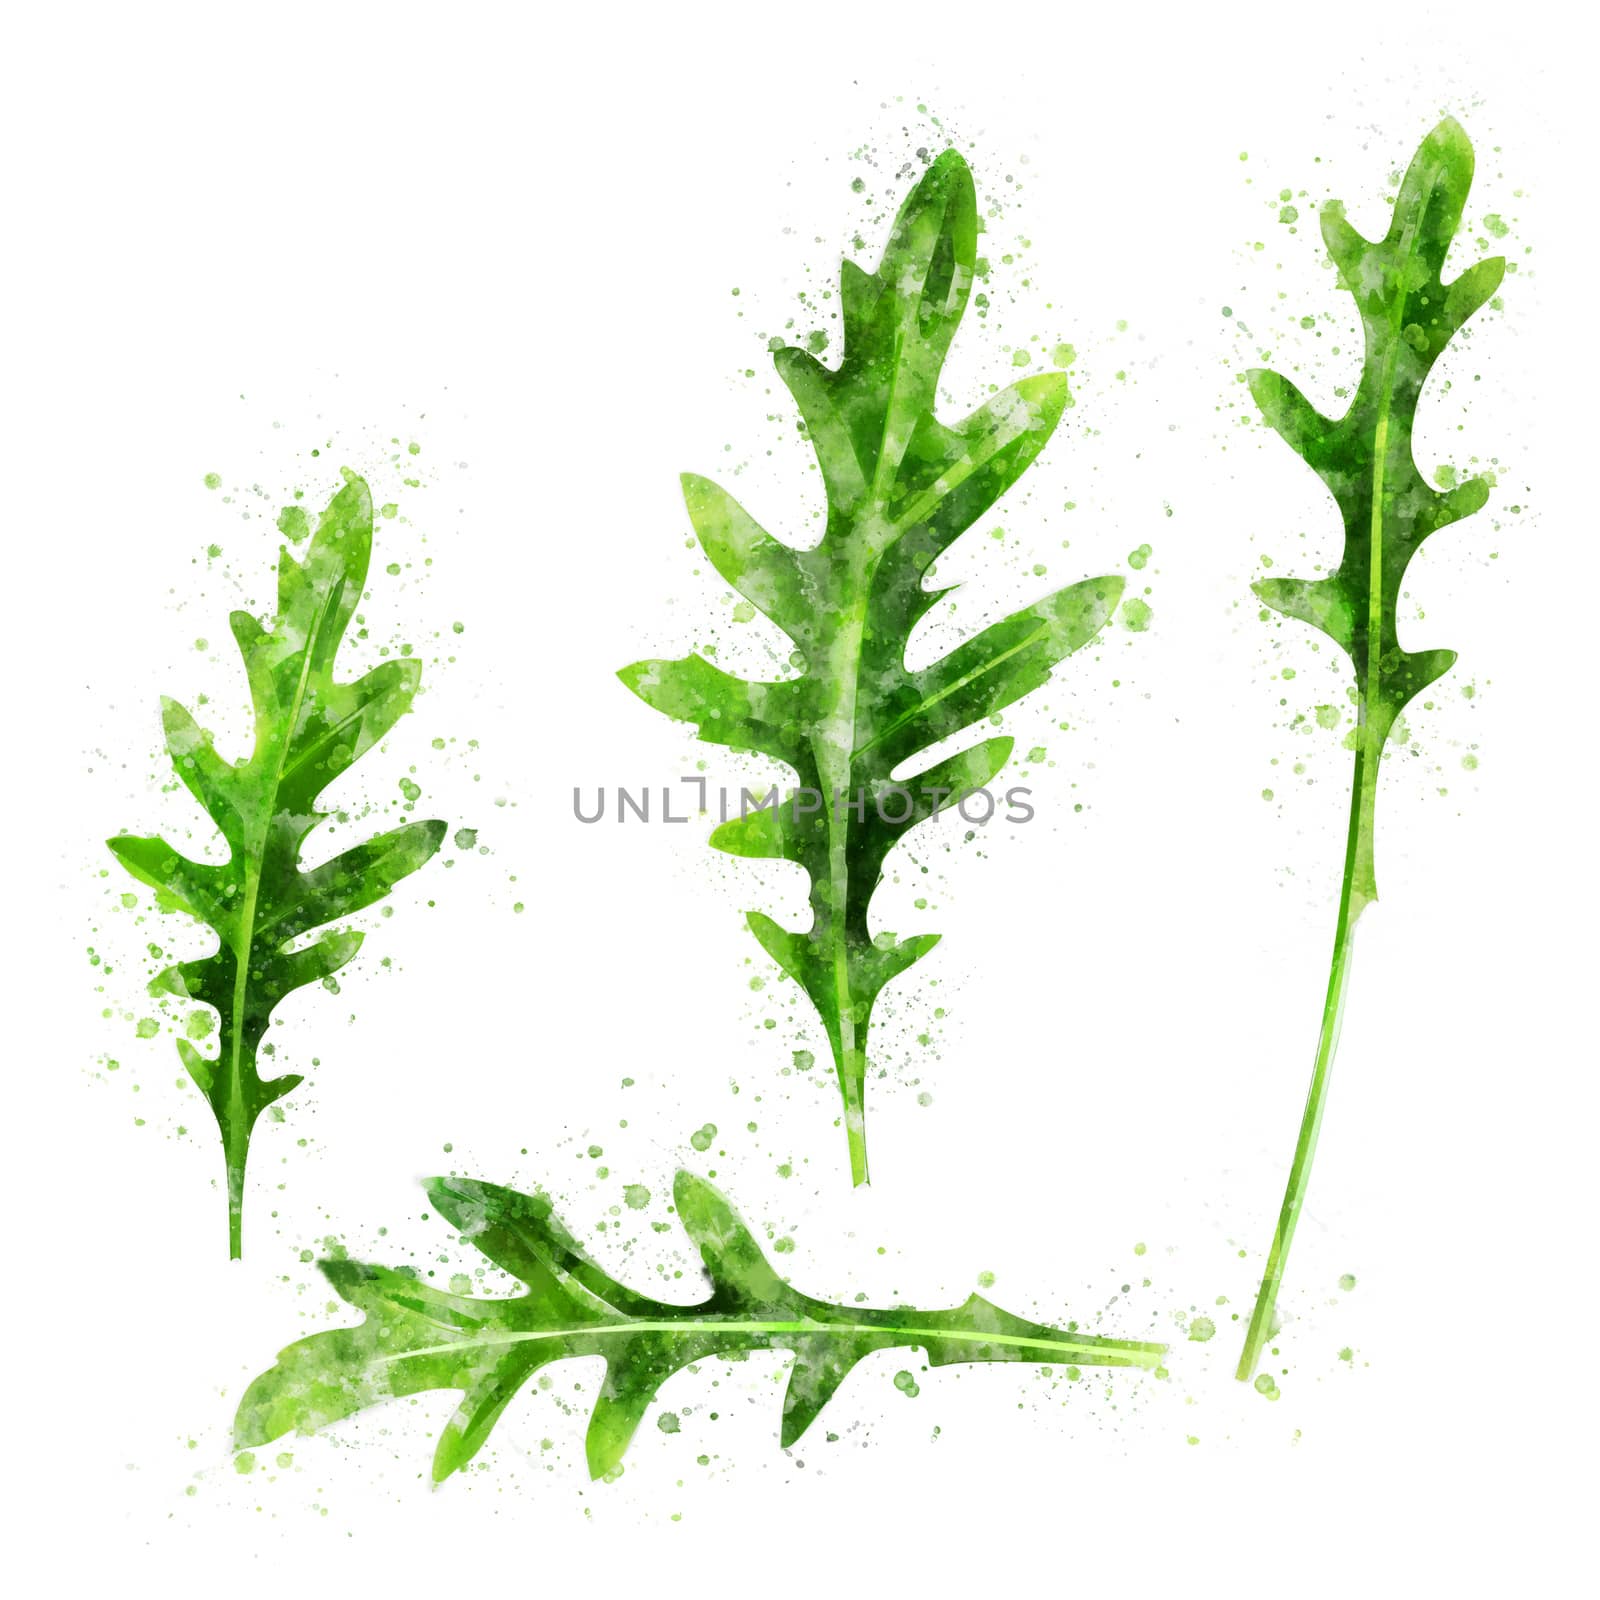 Arugula on white background. Watercolor illustration by ConceptCafe